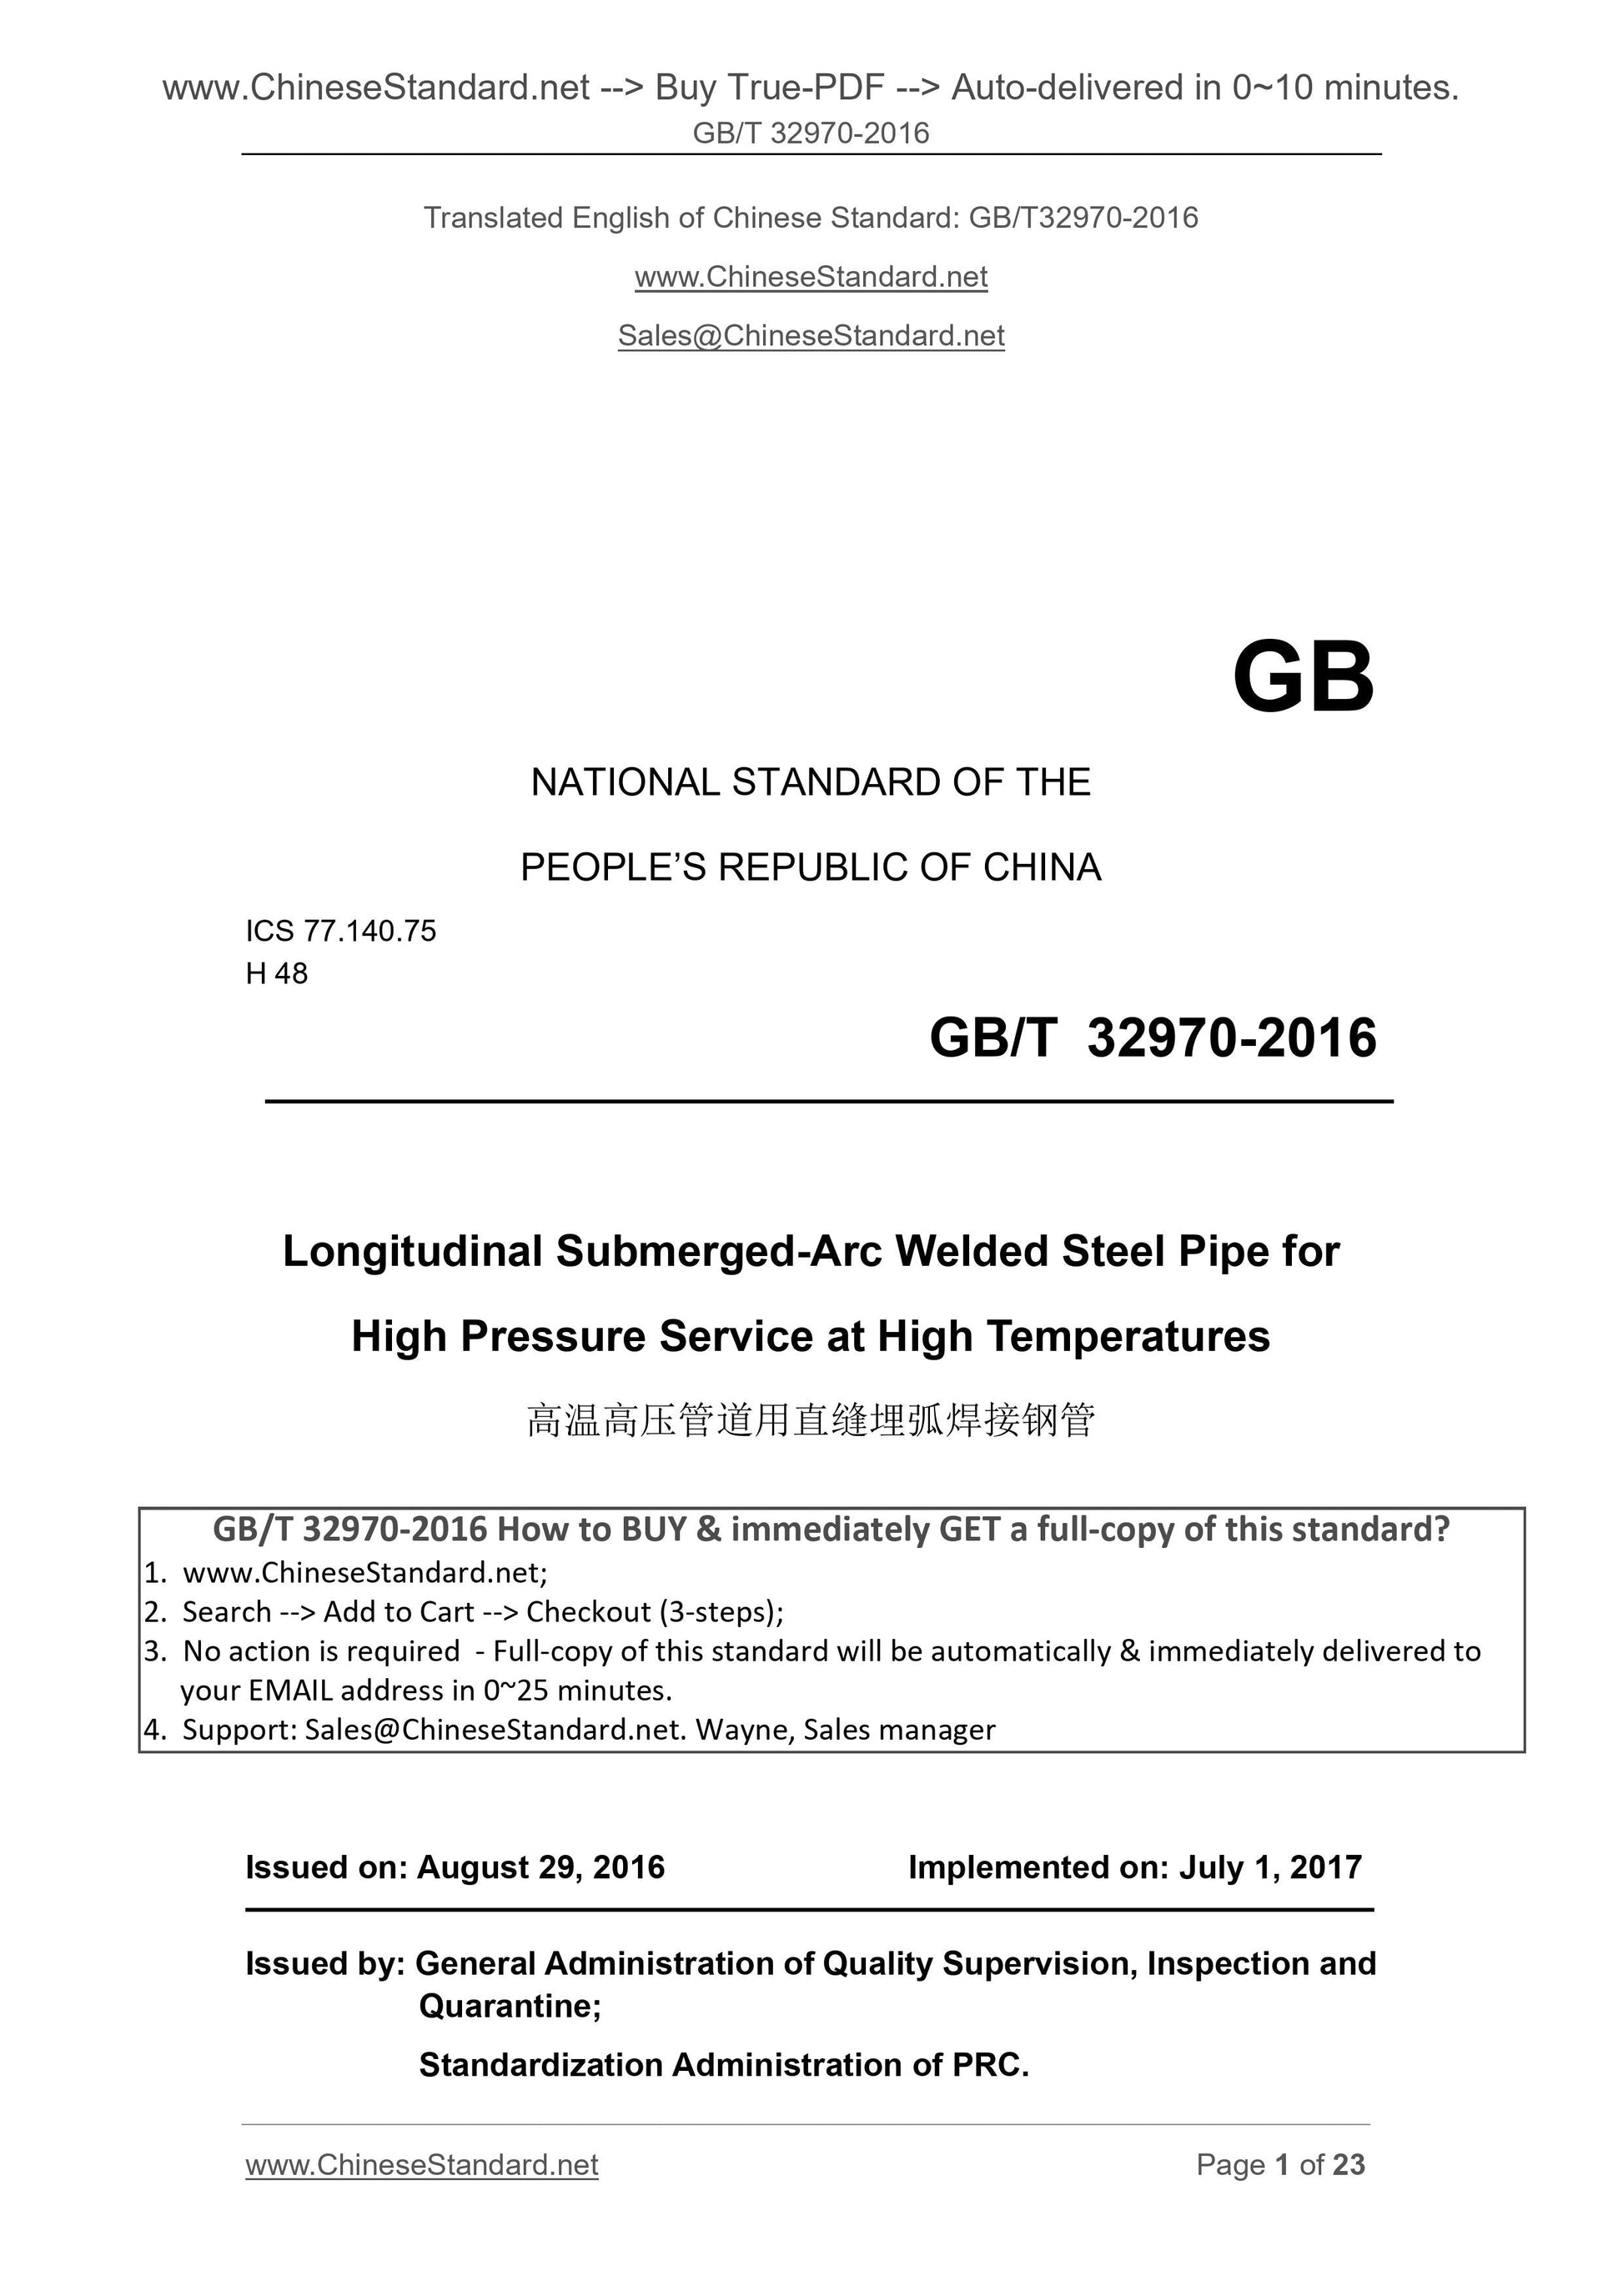 GB/T 32970-2016 Page 1